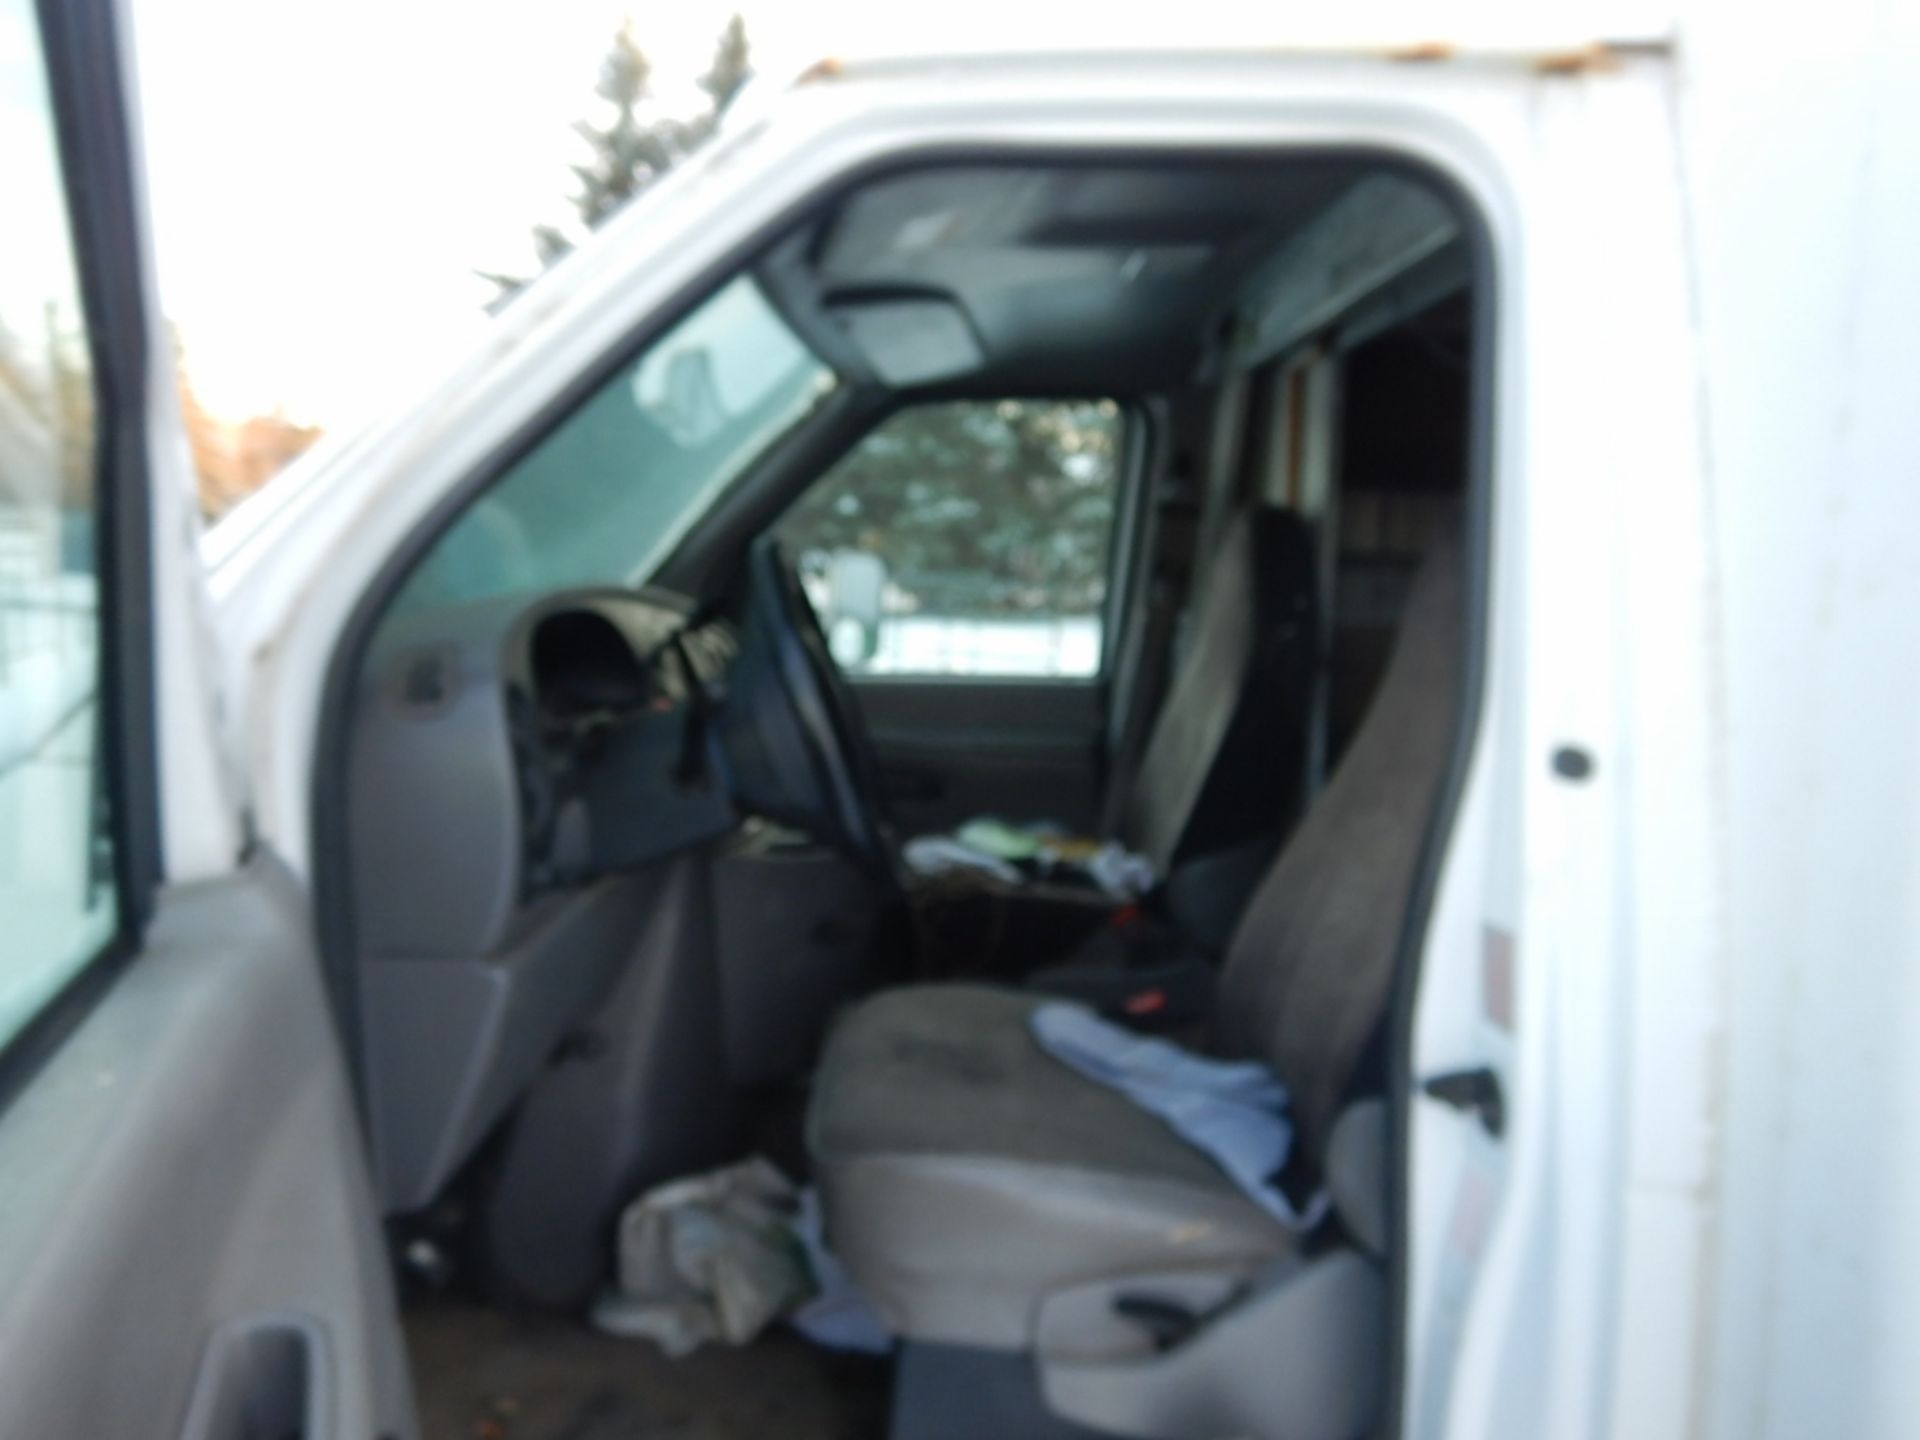 1997 FORD E350 CUBE VAN W/ DUAL WHEELS S/N 1FDKE30L2VHA87250, W/ ITB CUBE - INOPERABLE - Image 4 of 8